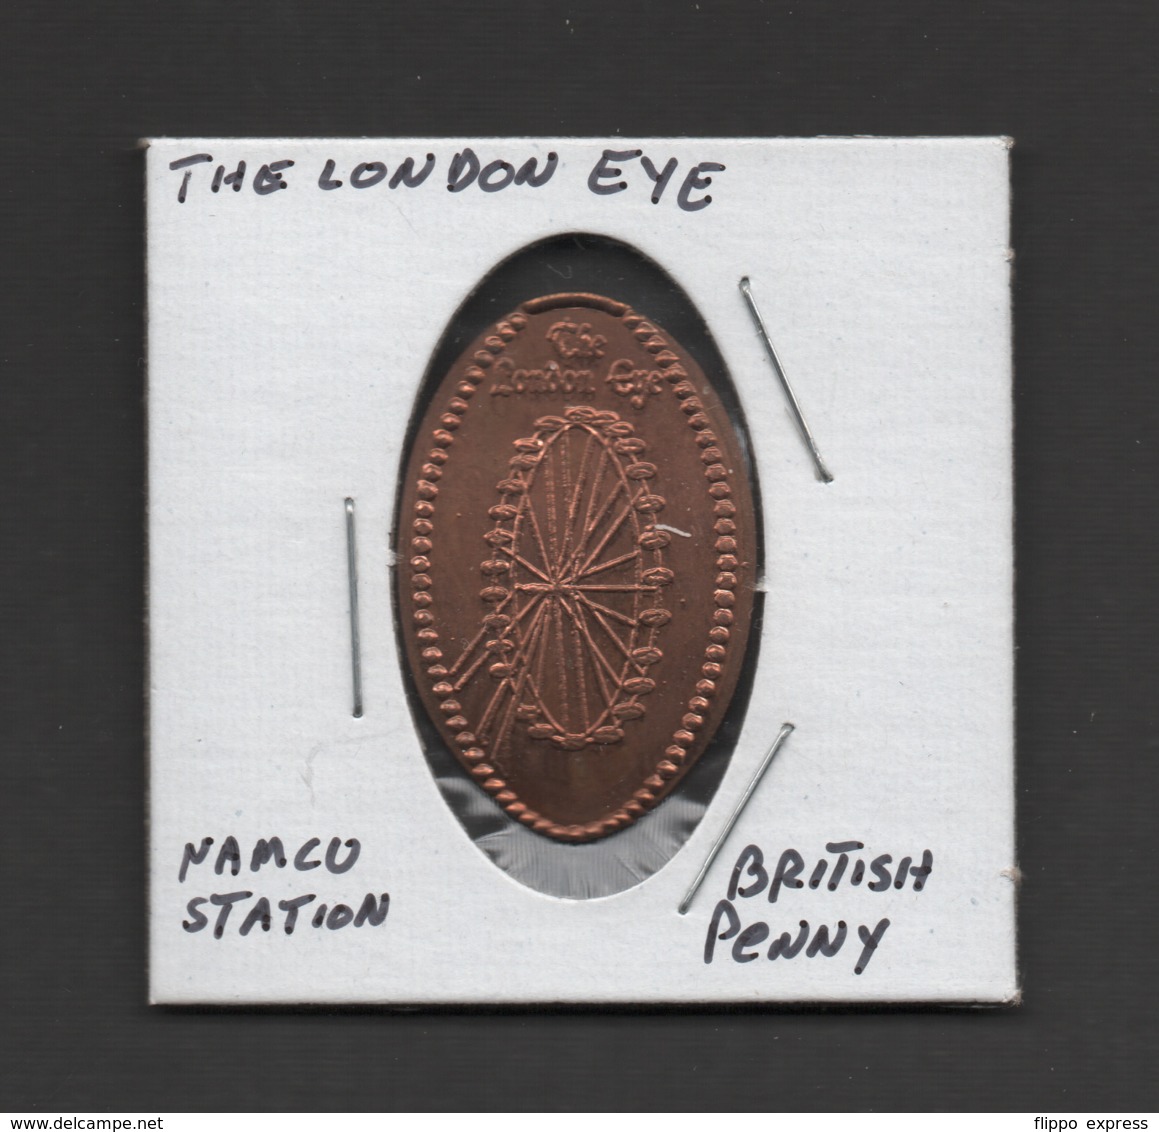 Pressed Penny, Elongated Coin, The London Eye, England - Souvenirmunten (elongated Coins)